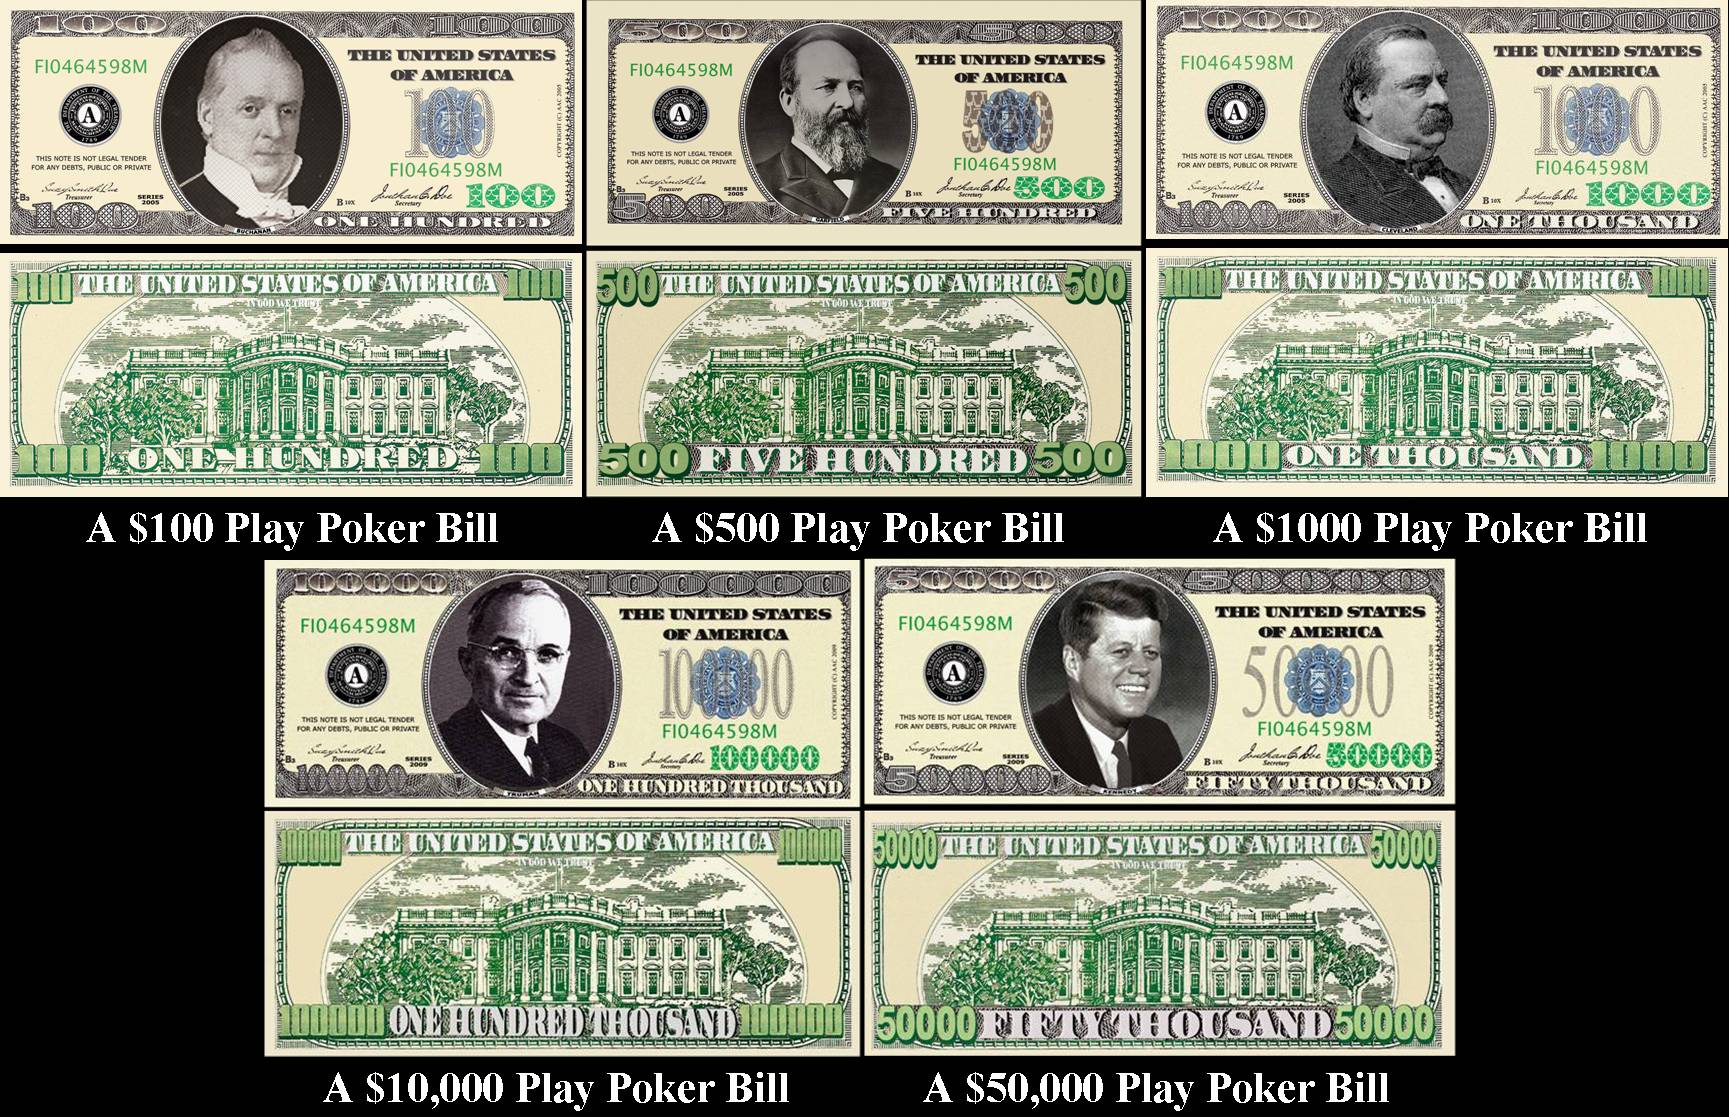 Play Online Poker For Real Money